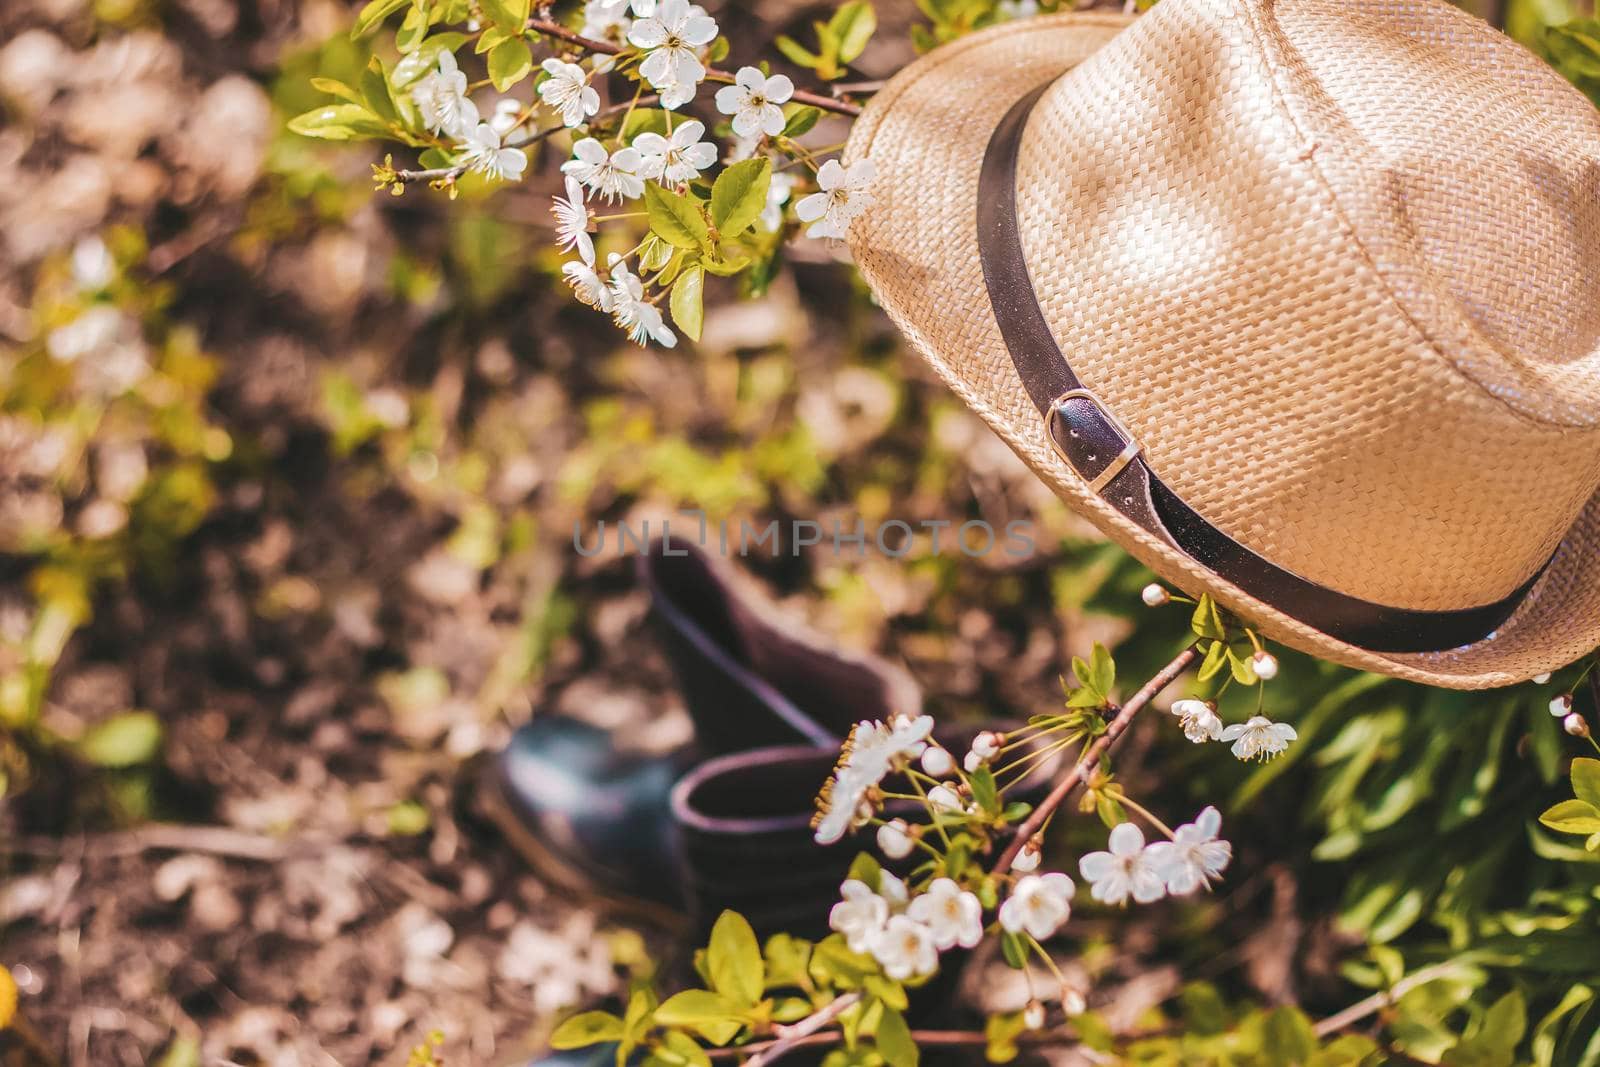 In the garden, on a tree with white cherry blossoms, there is a garden hat, and under it are boots. Gardening and gardening, by Alina_Lebed